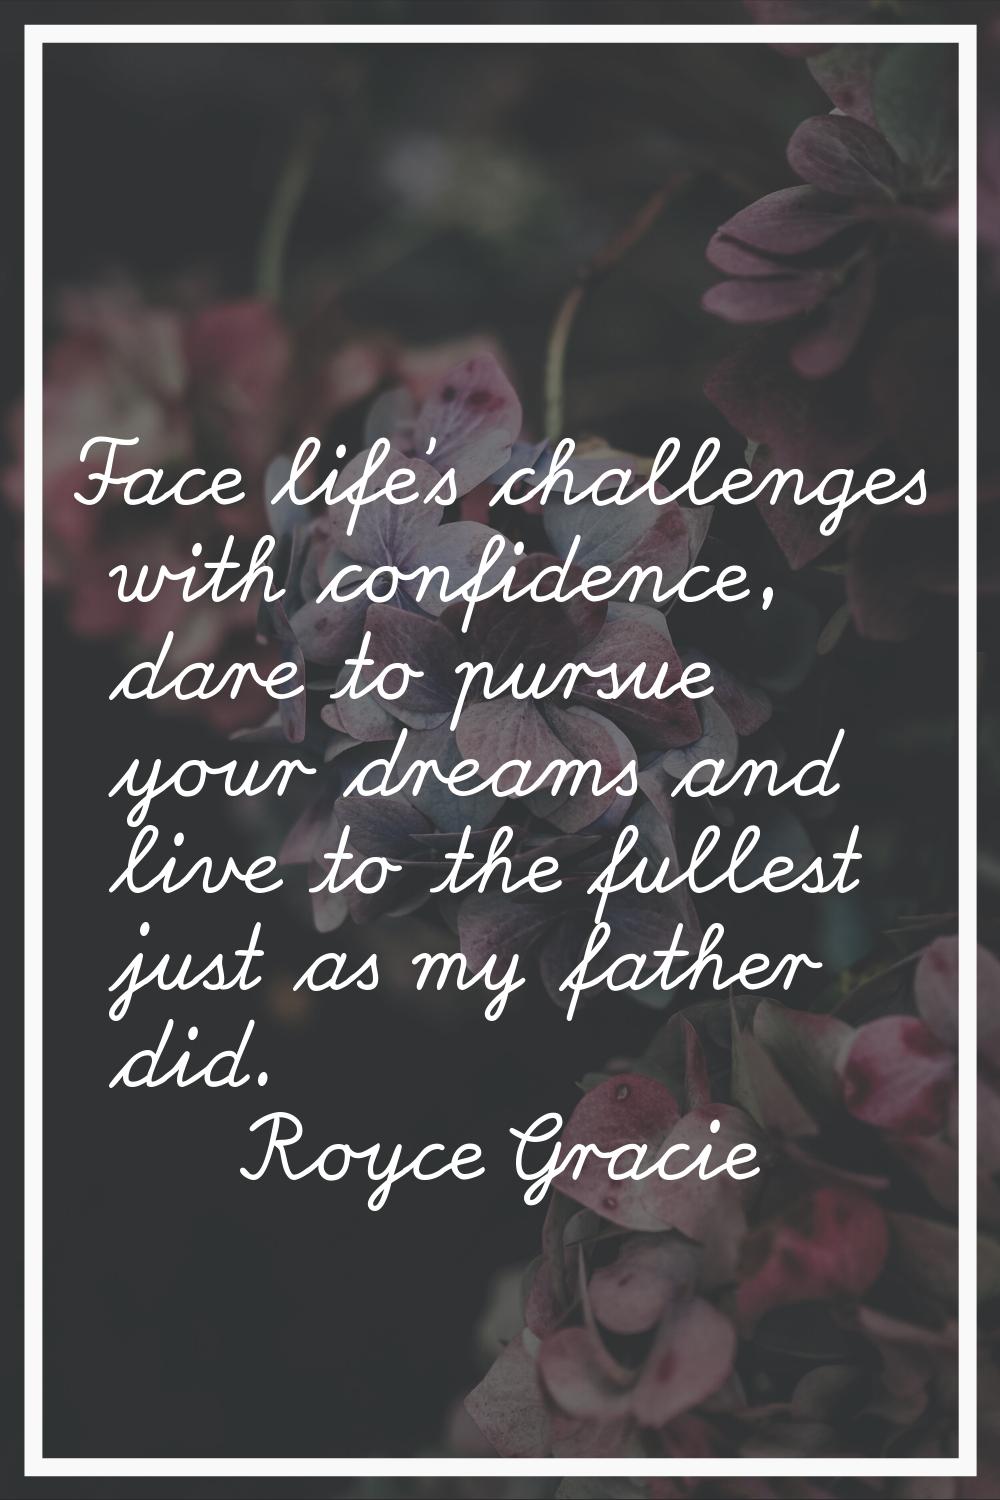 Face life's challenges with confidence, dare to pursue your dreams and live to the fullest just as 